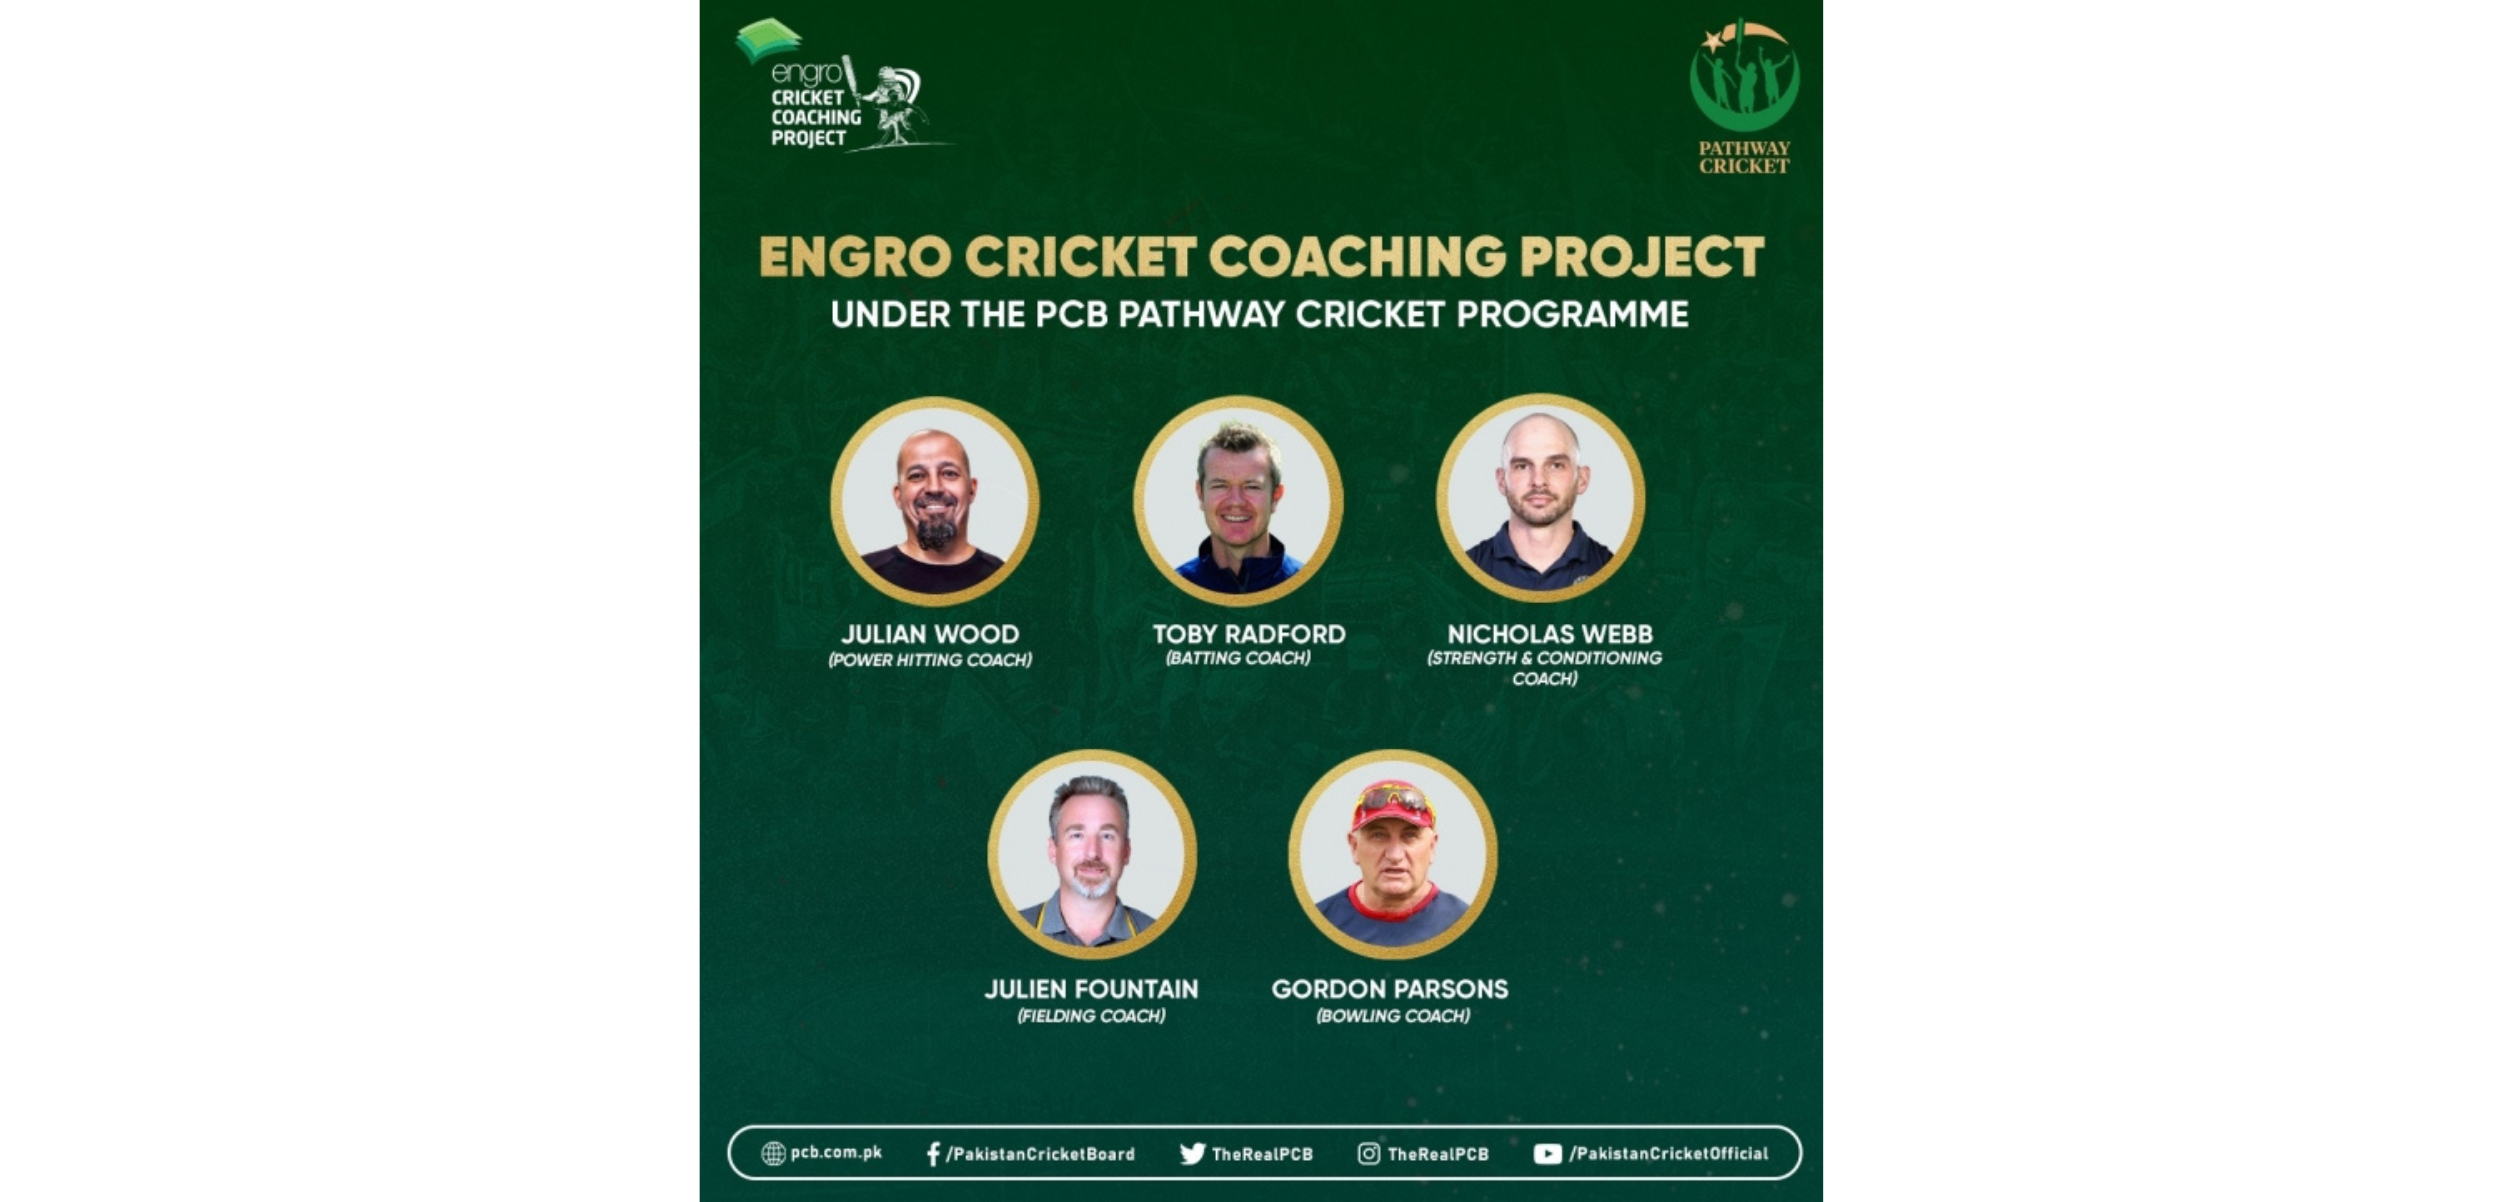 PCB: Elite foreign coaches join Engro Cricket Coaching Project